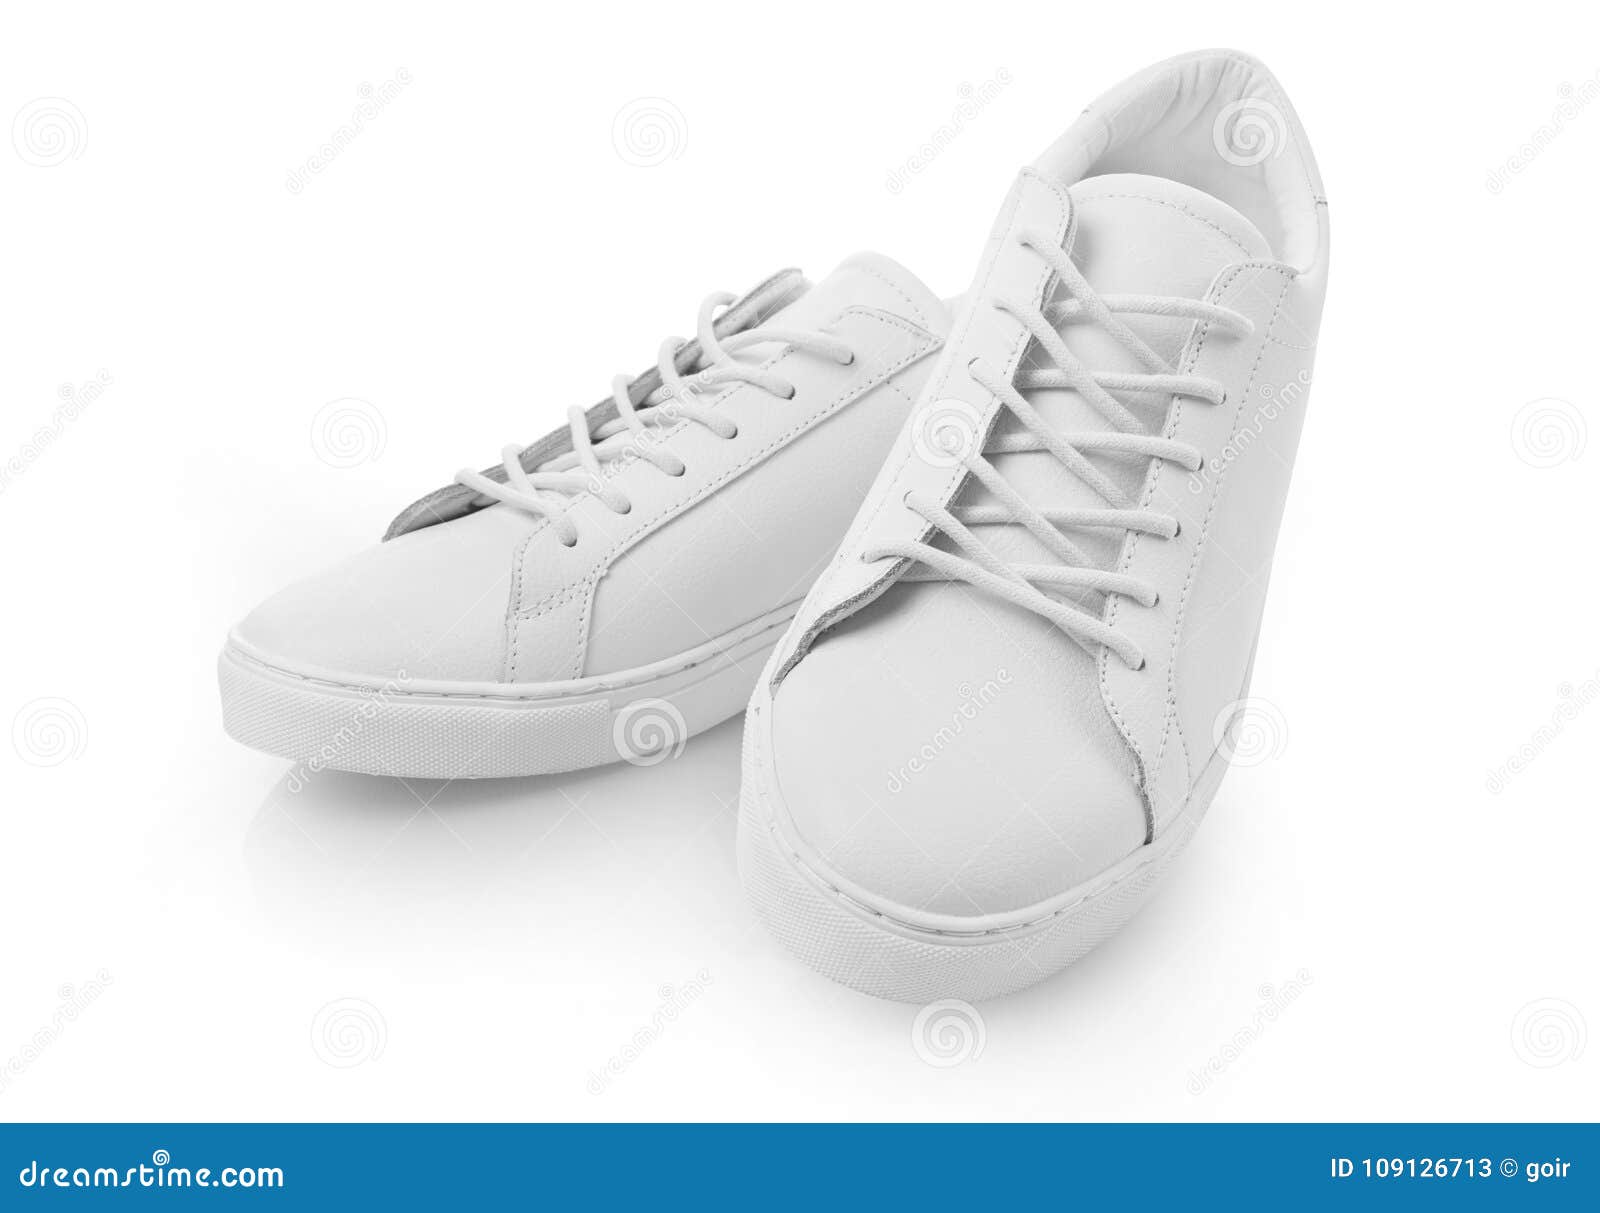 White sneakers isolated stock image. Image of activity - 109126713